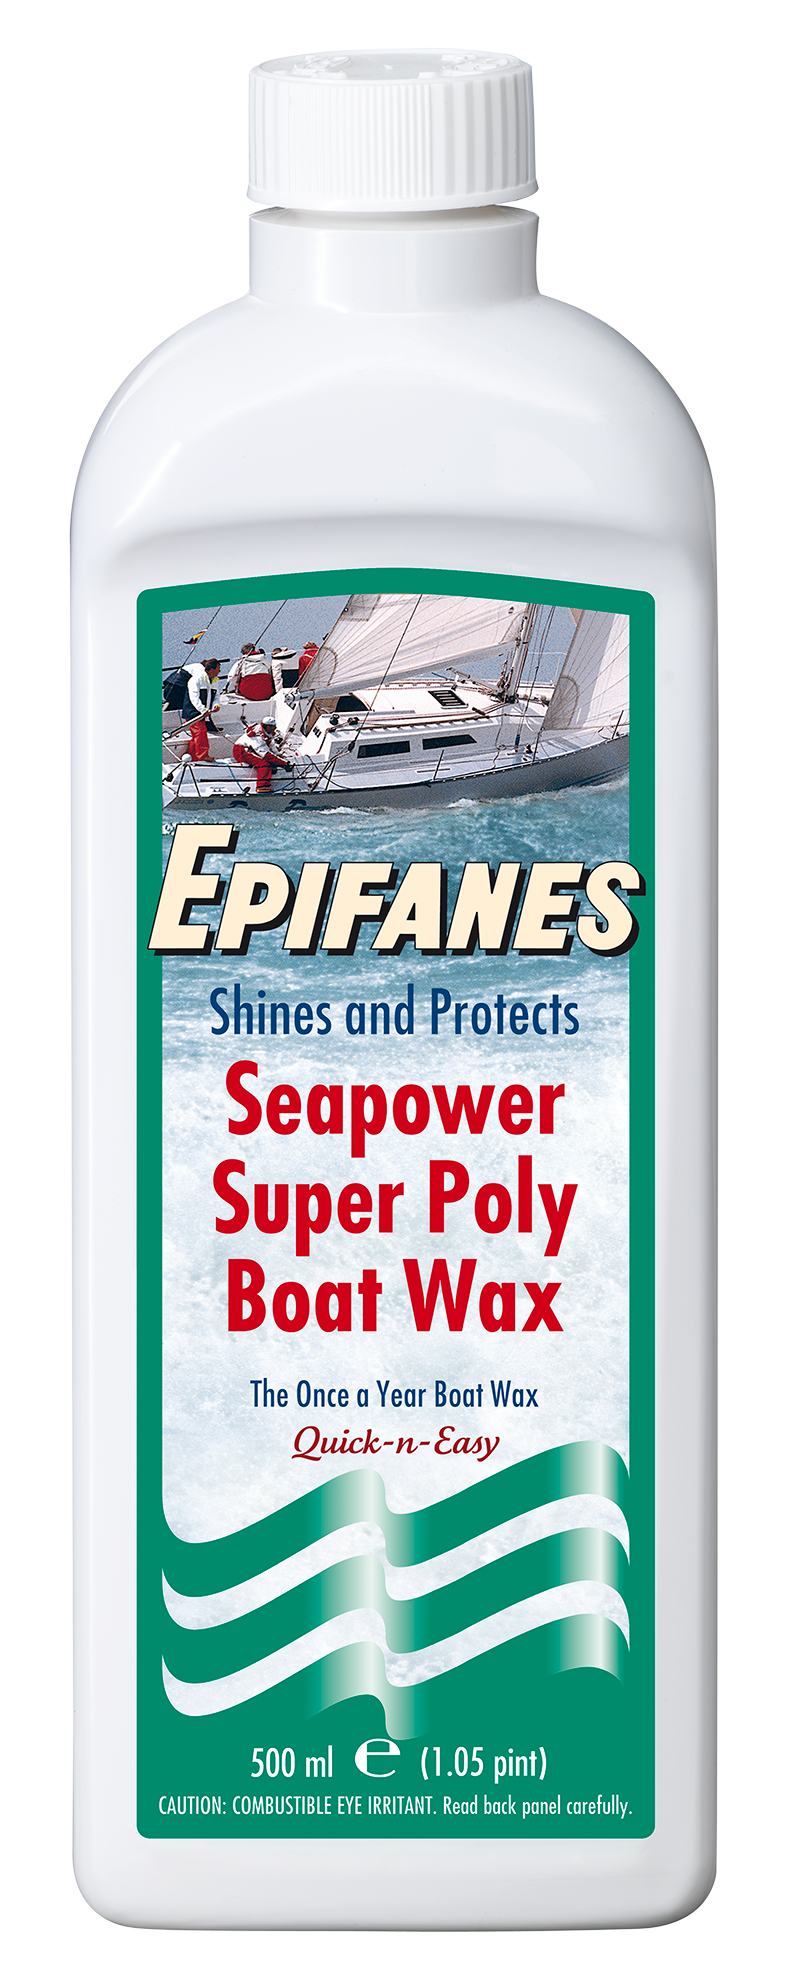 EPIFANES Seapower Super Poly Boat Wax